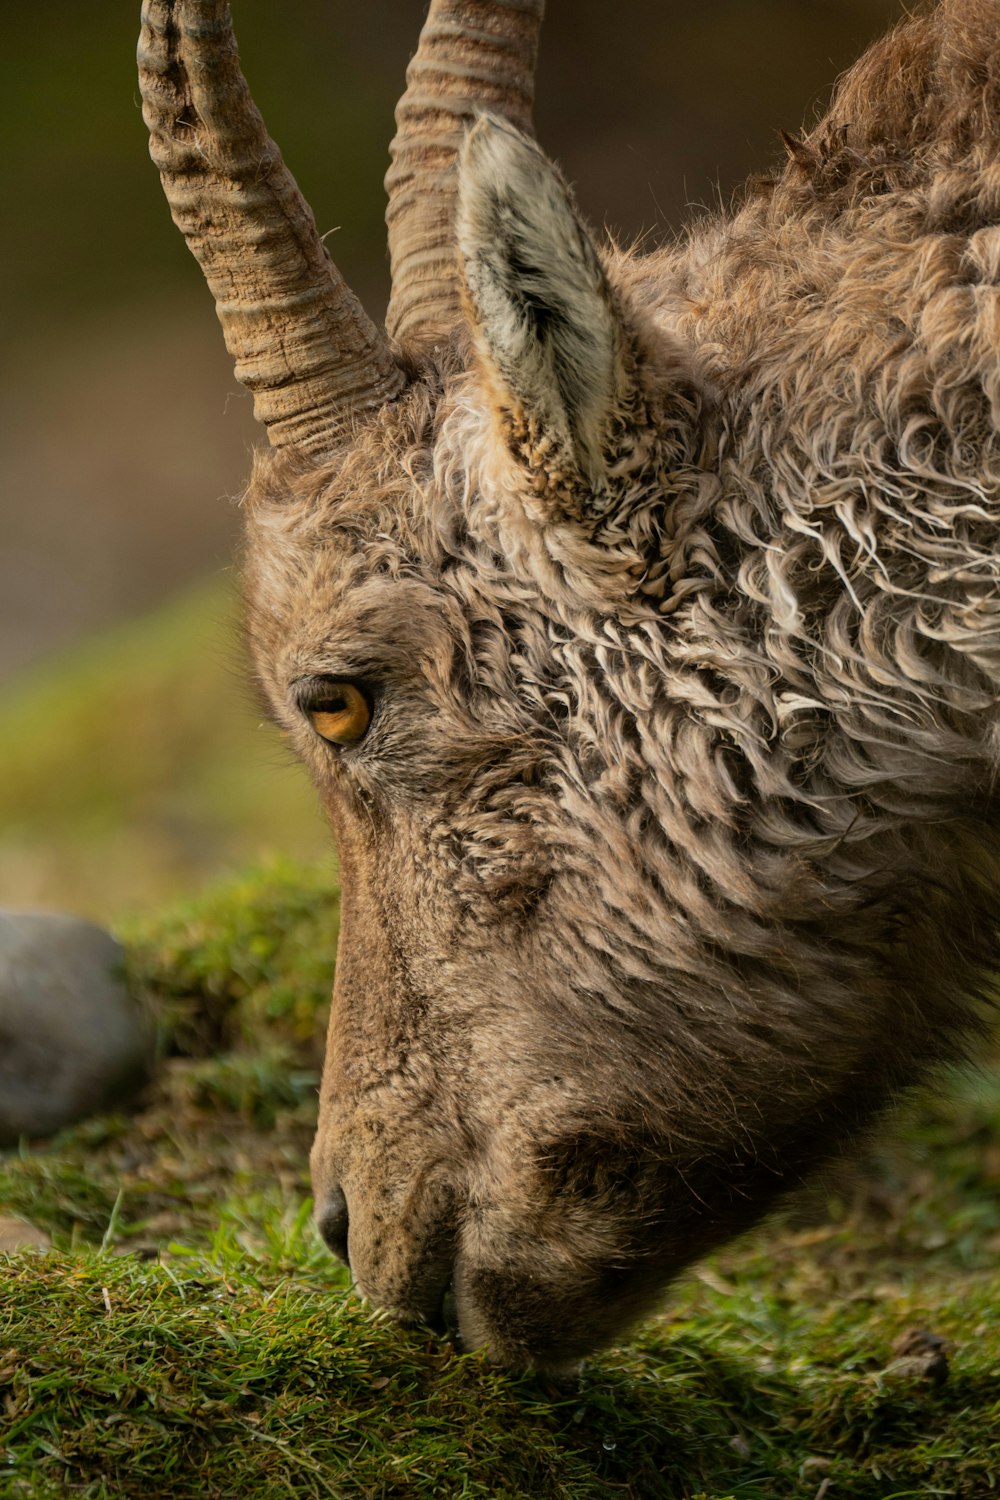 a horned animal with long horns grazing on grass